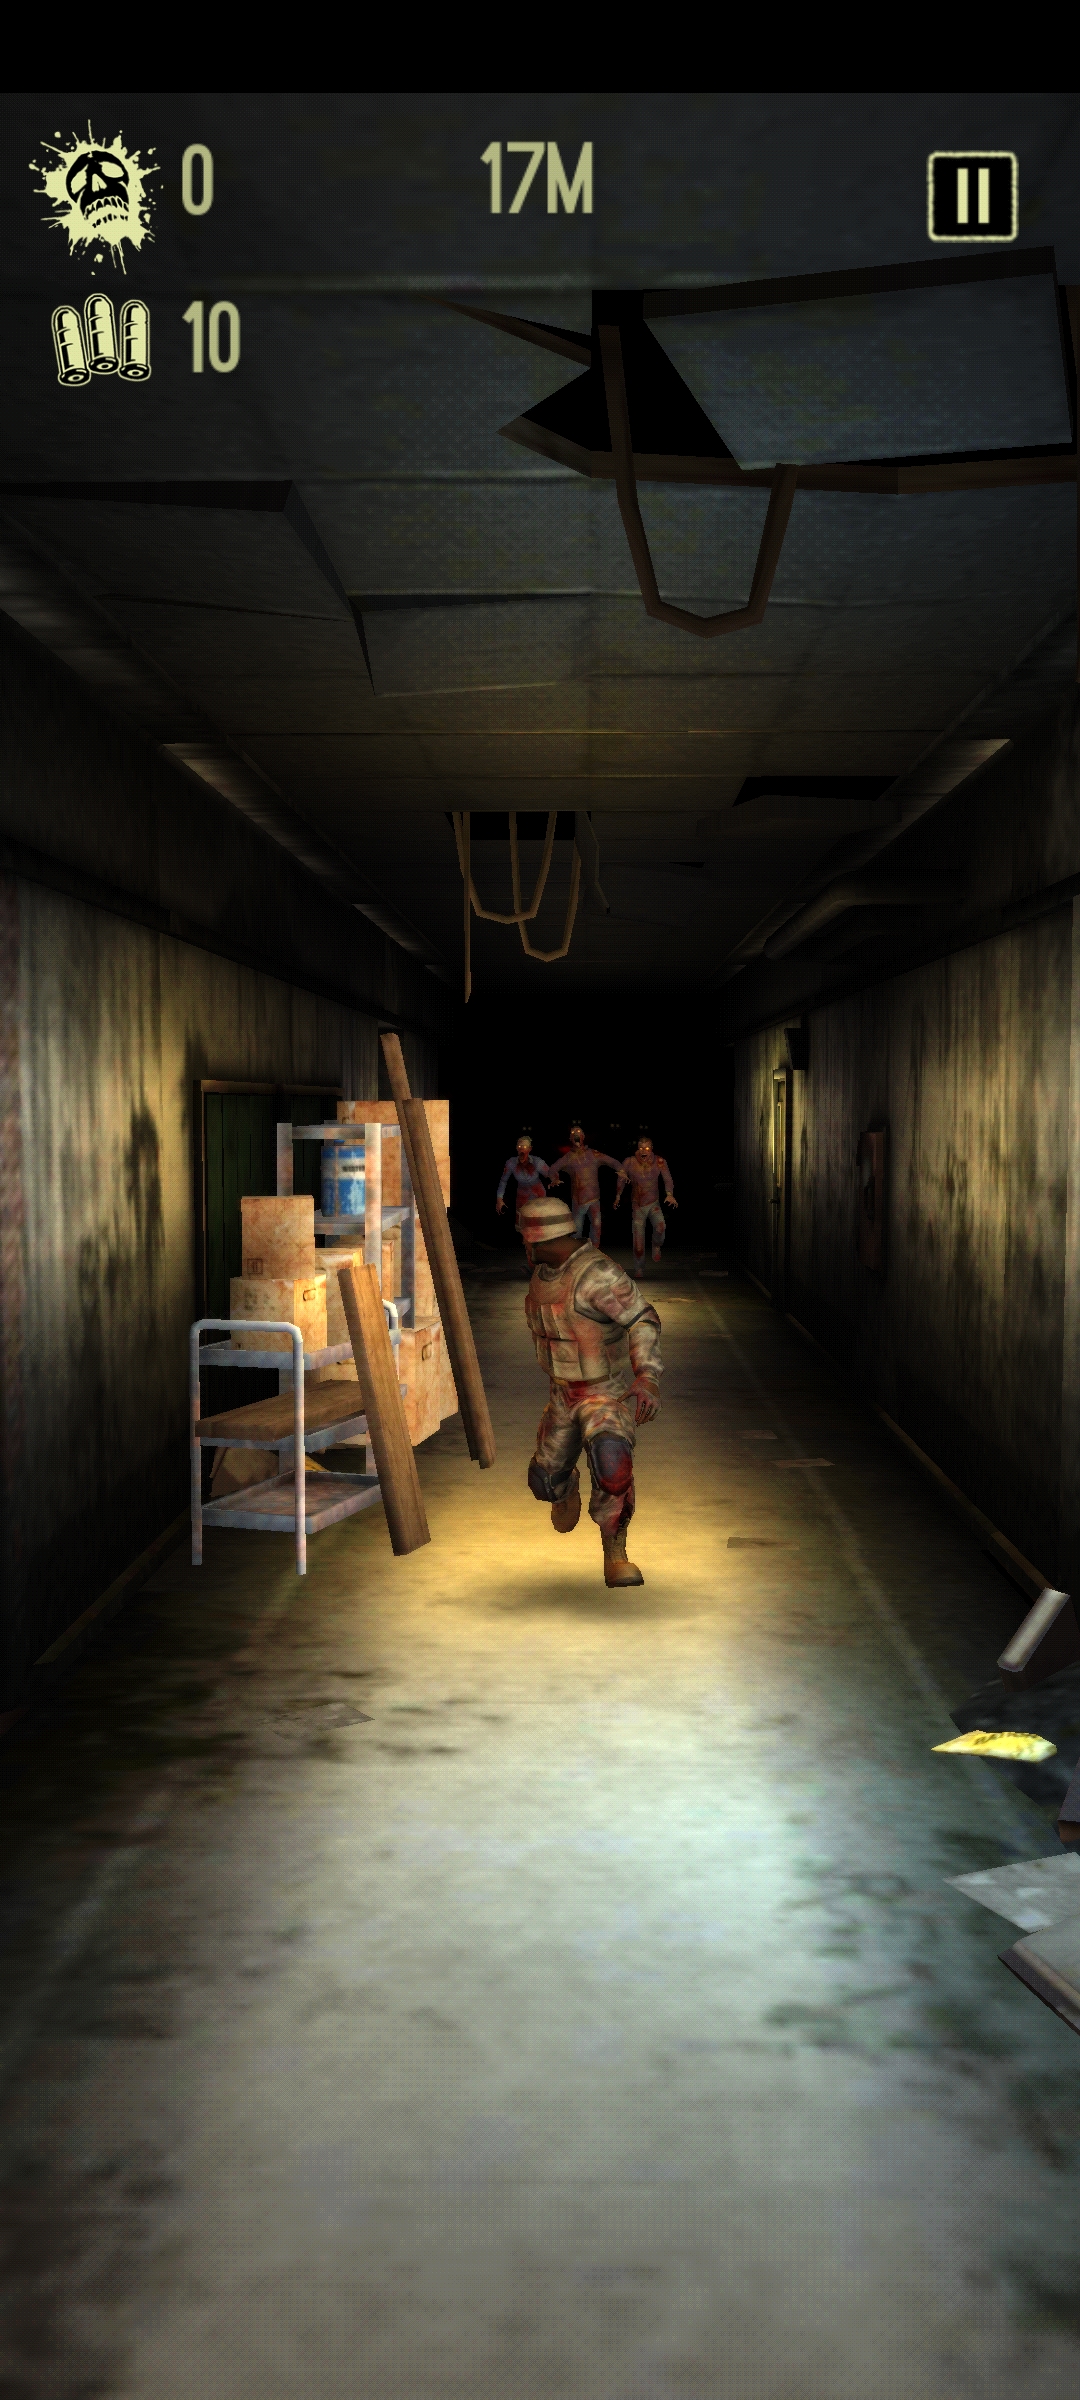 Corridor Z - Game Cuộc Chạy Trốn Zombie Cho Android